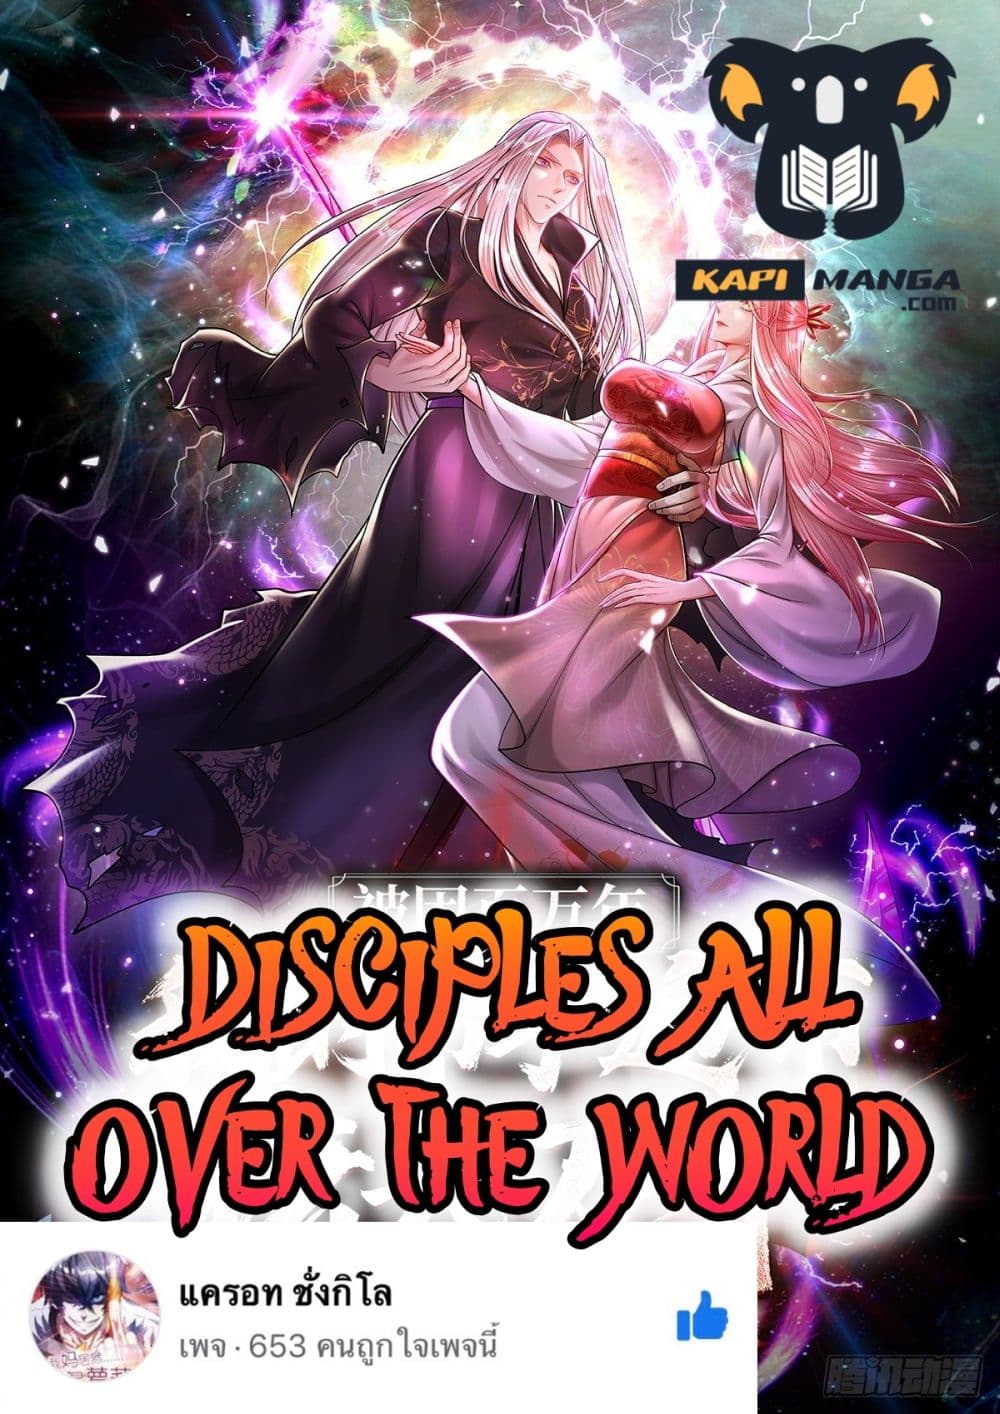 Disciples All Over the World à¸à¸­à¸à¸à¸µà¹ 63 (1)